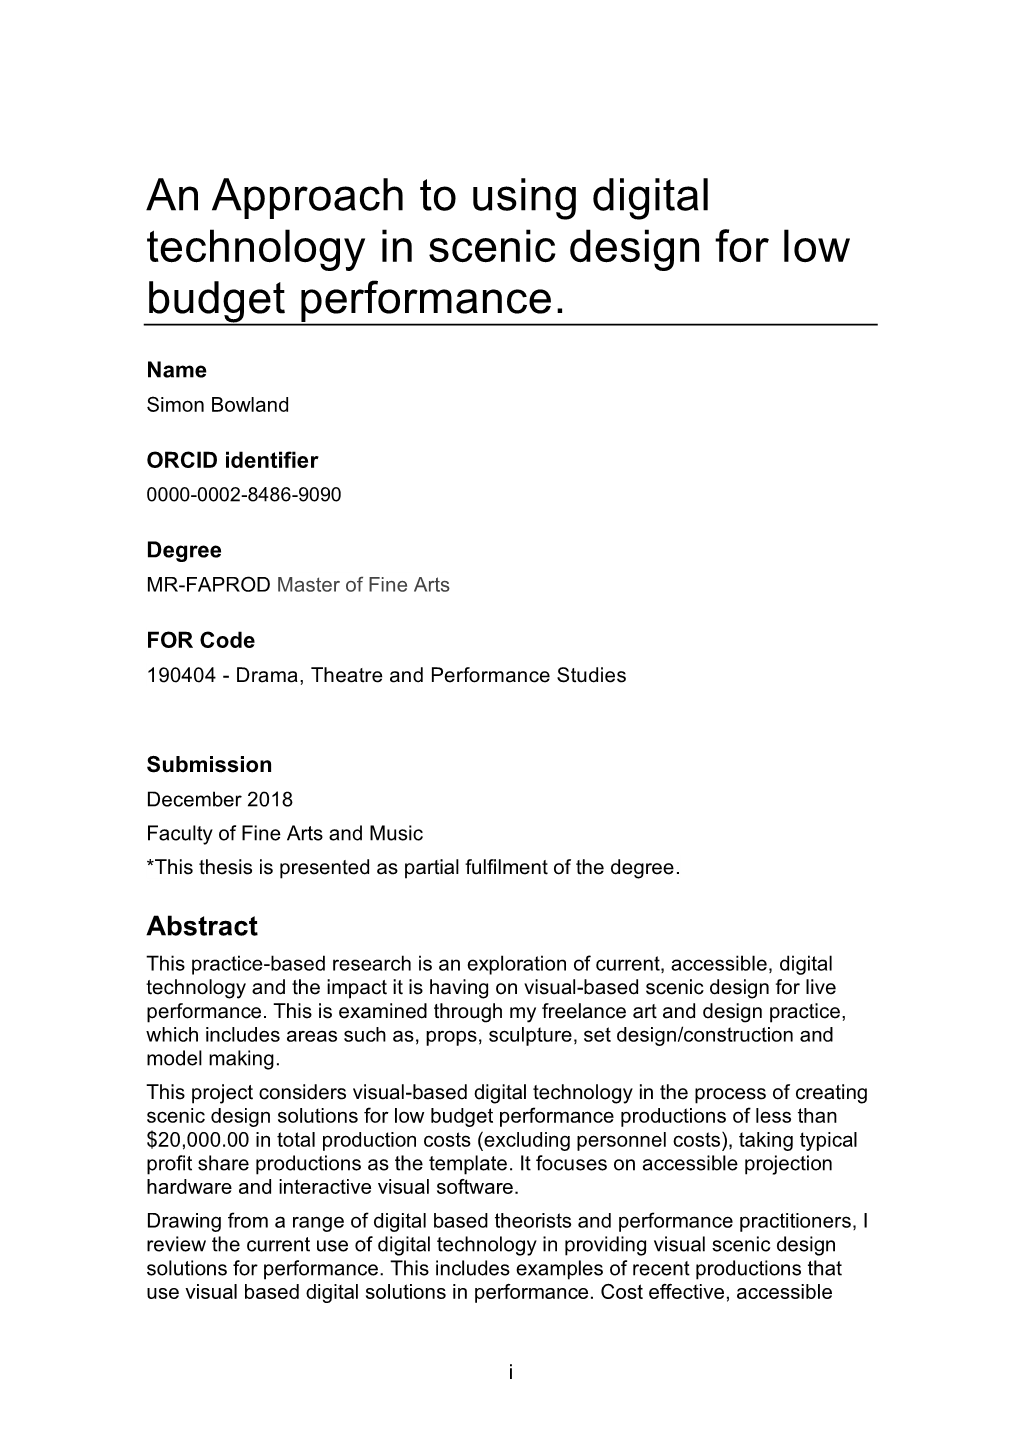 An Approach to Using Digital Technology in Scenic Design for Low Budget Performance